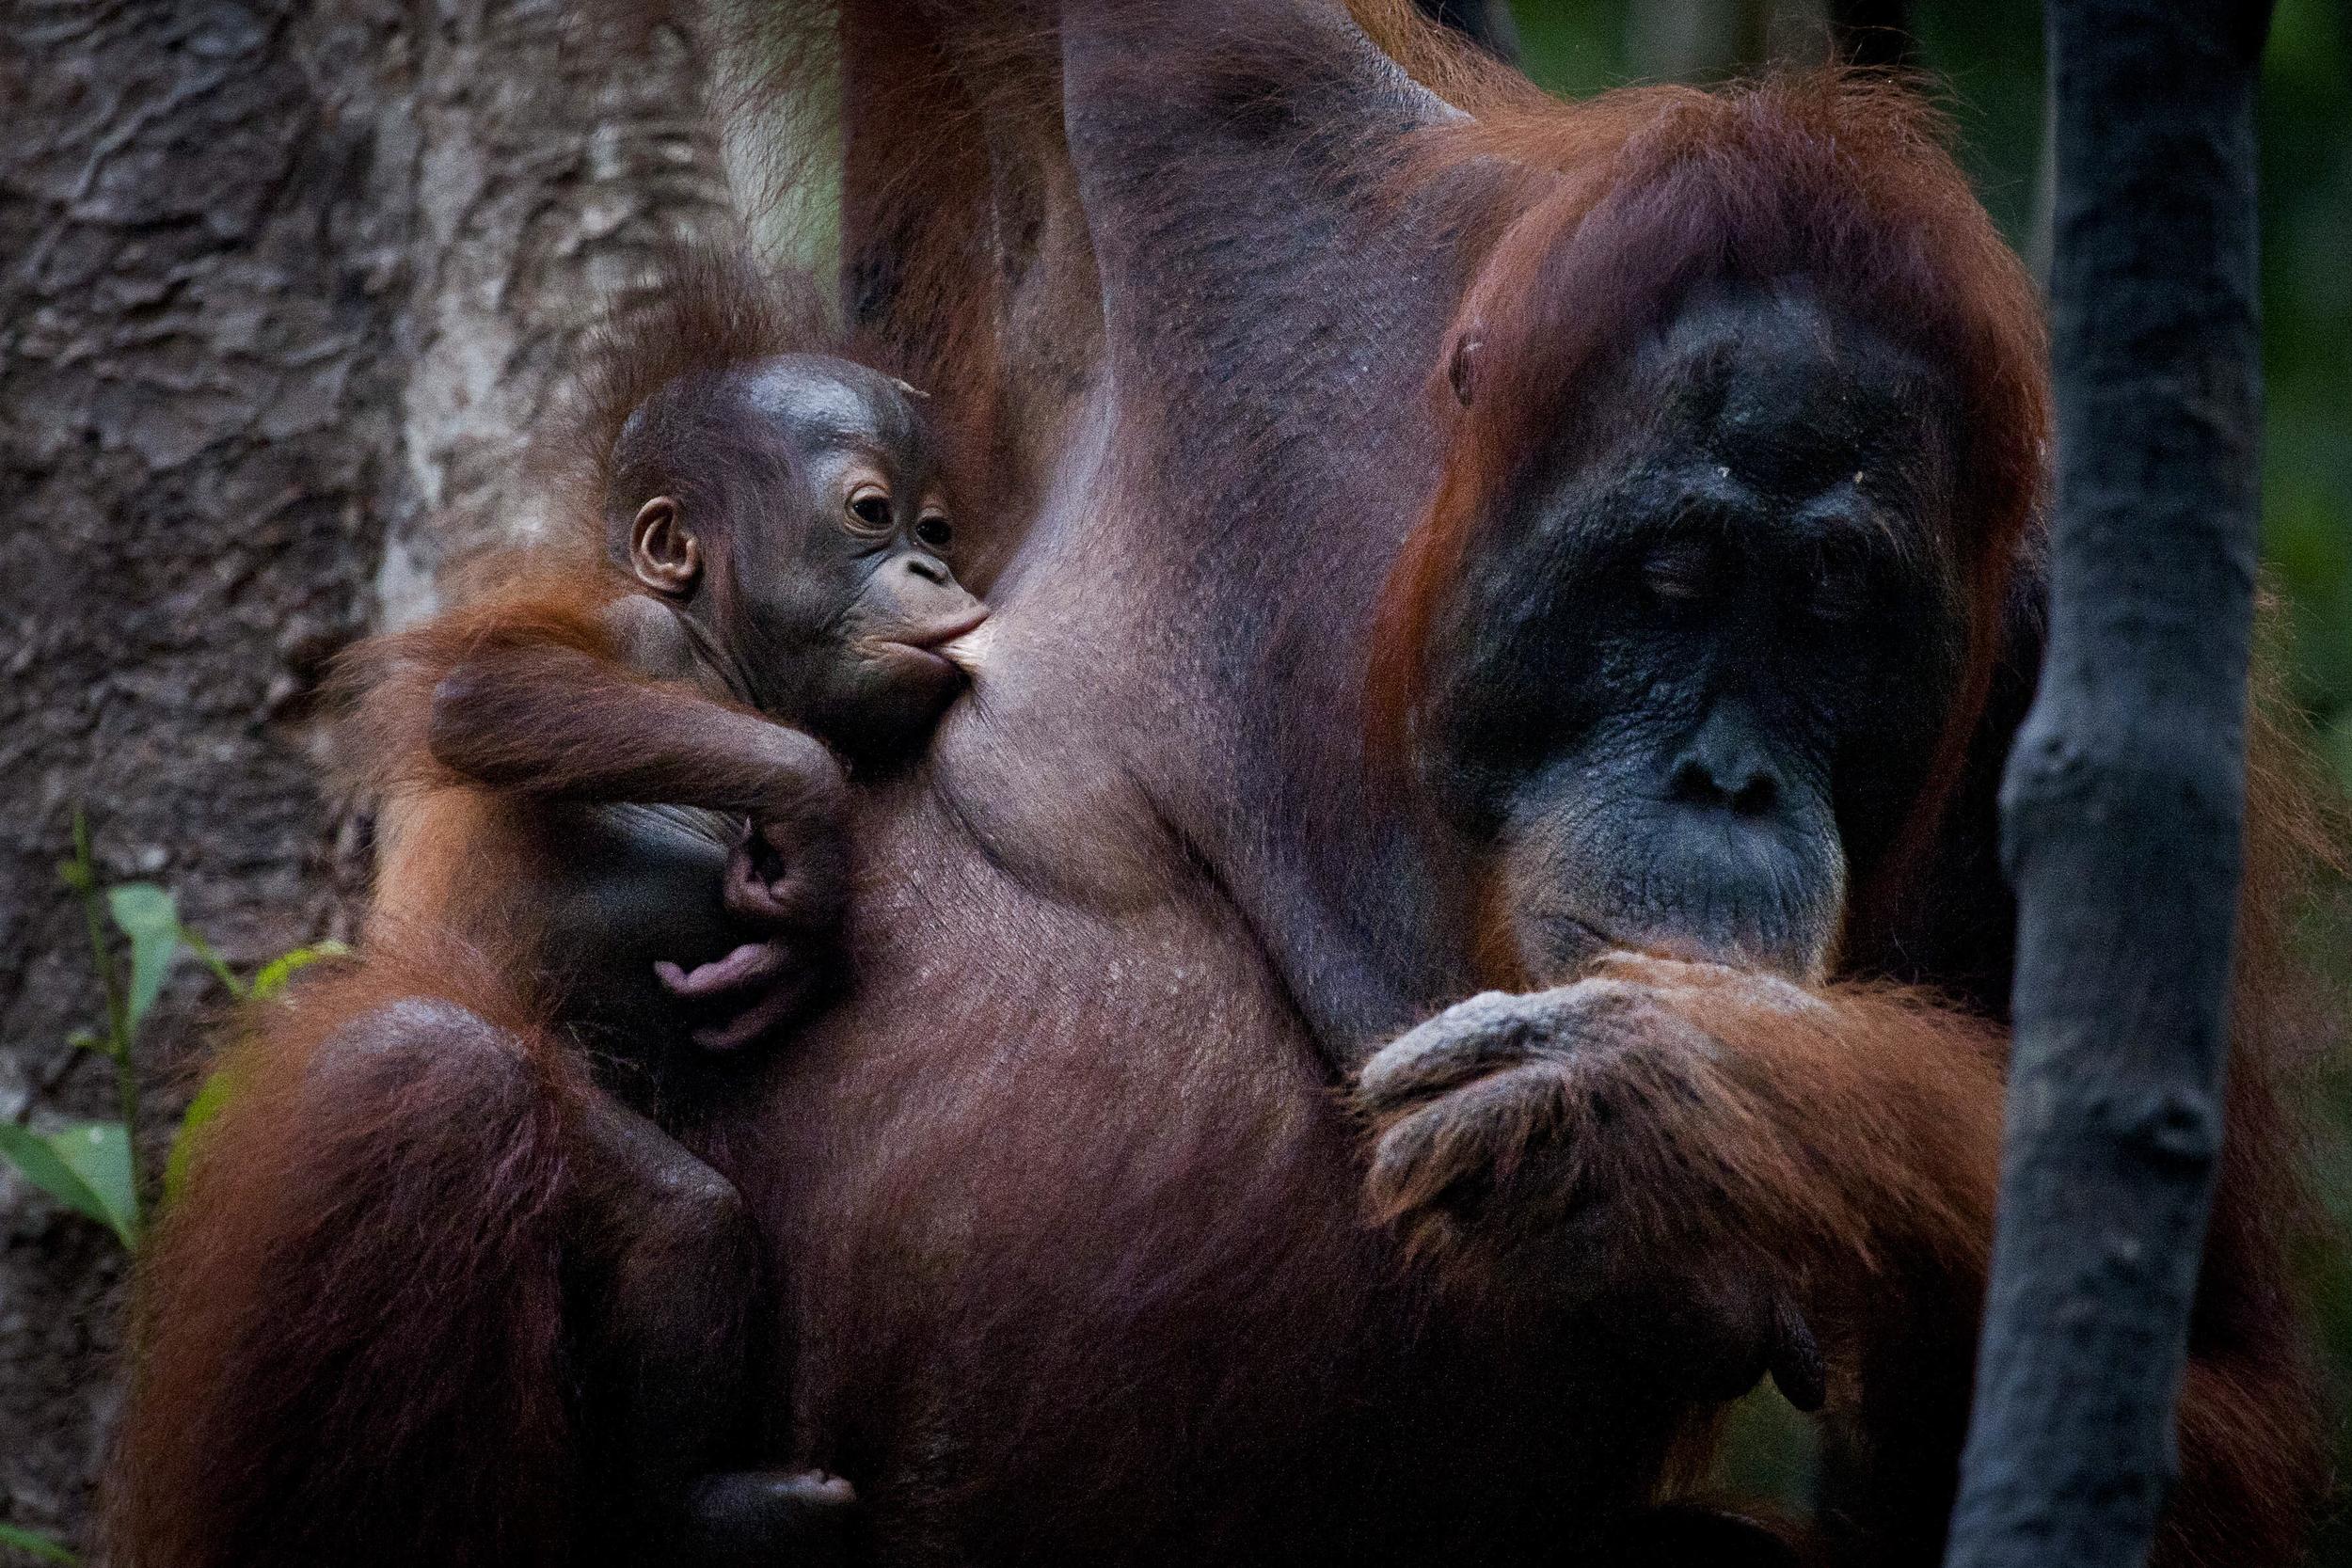 A mother with her baby orangutan feeding at her breast